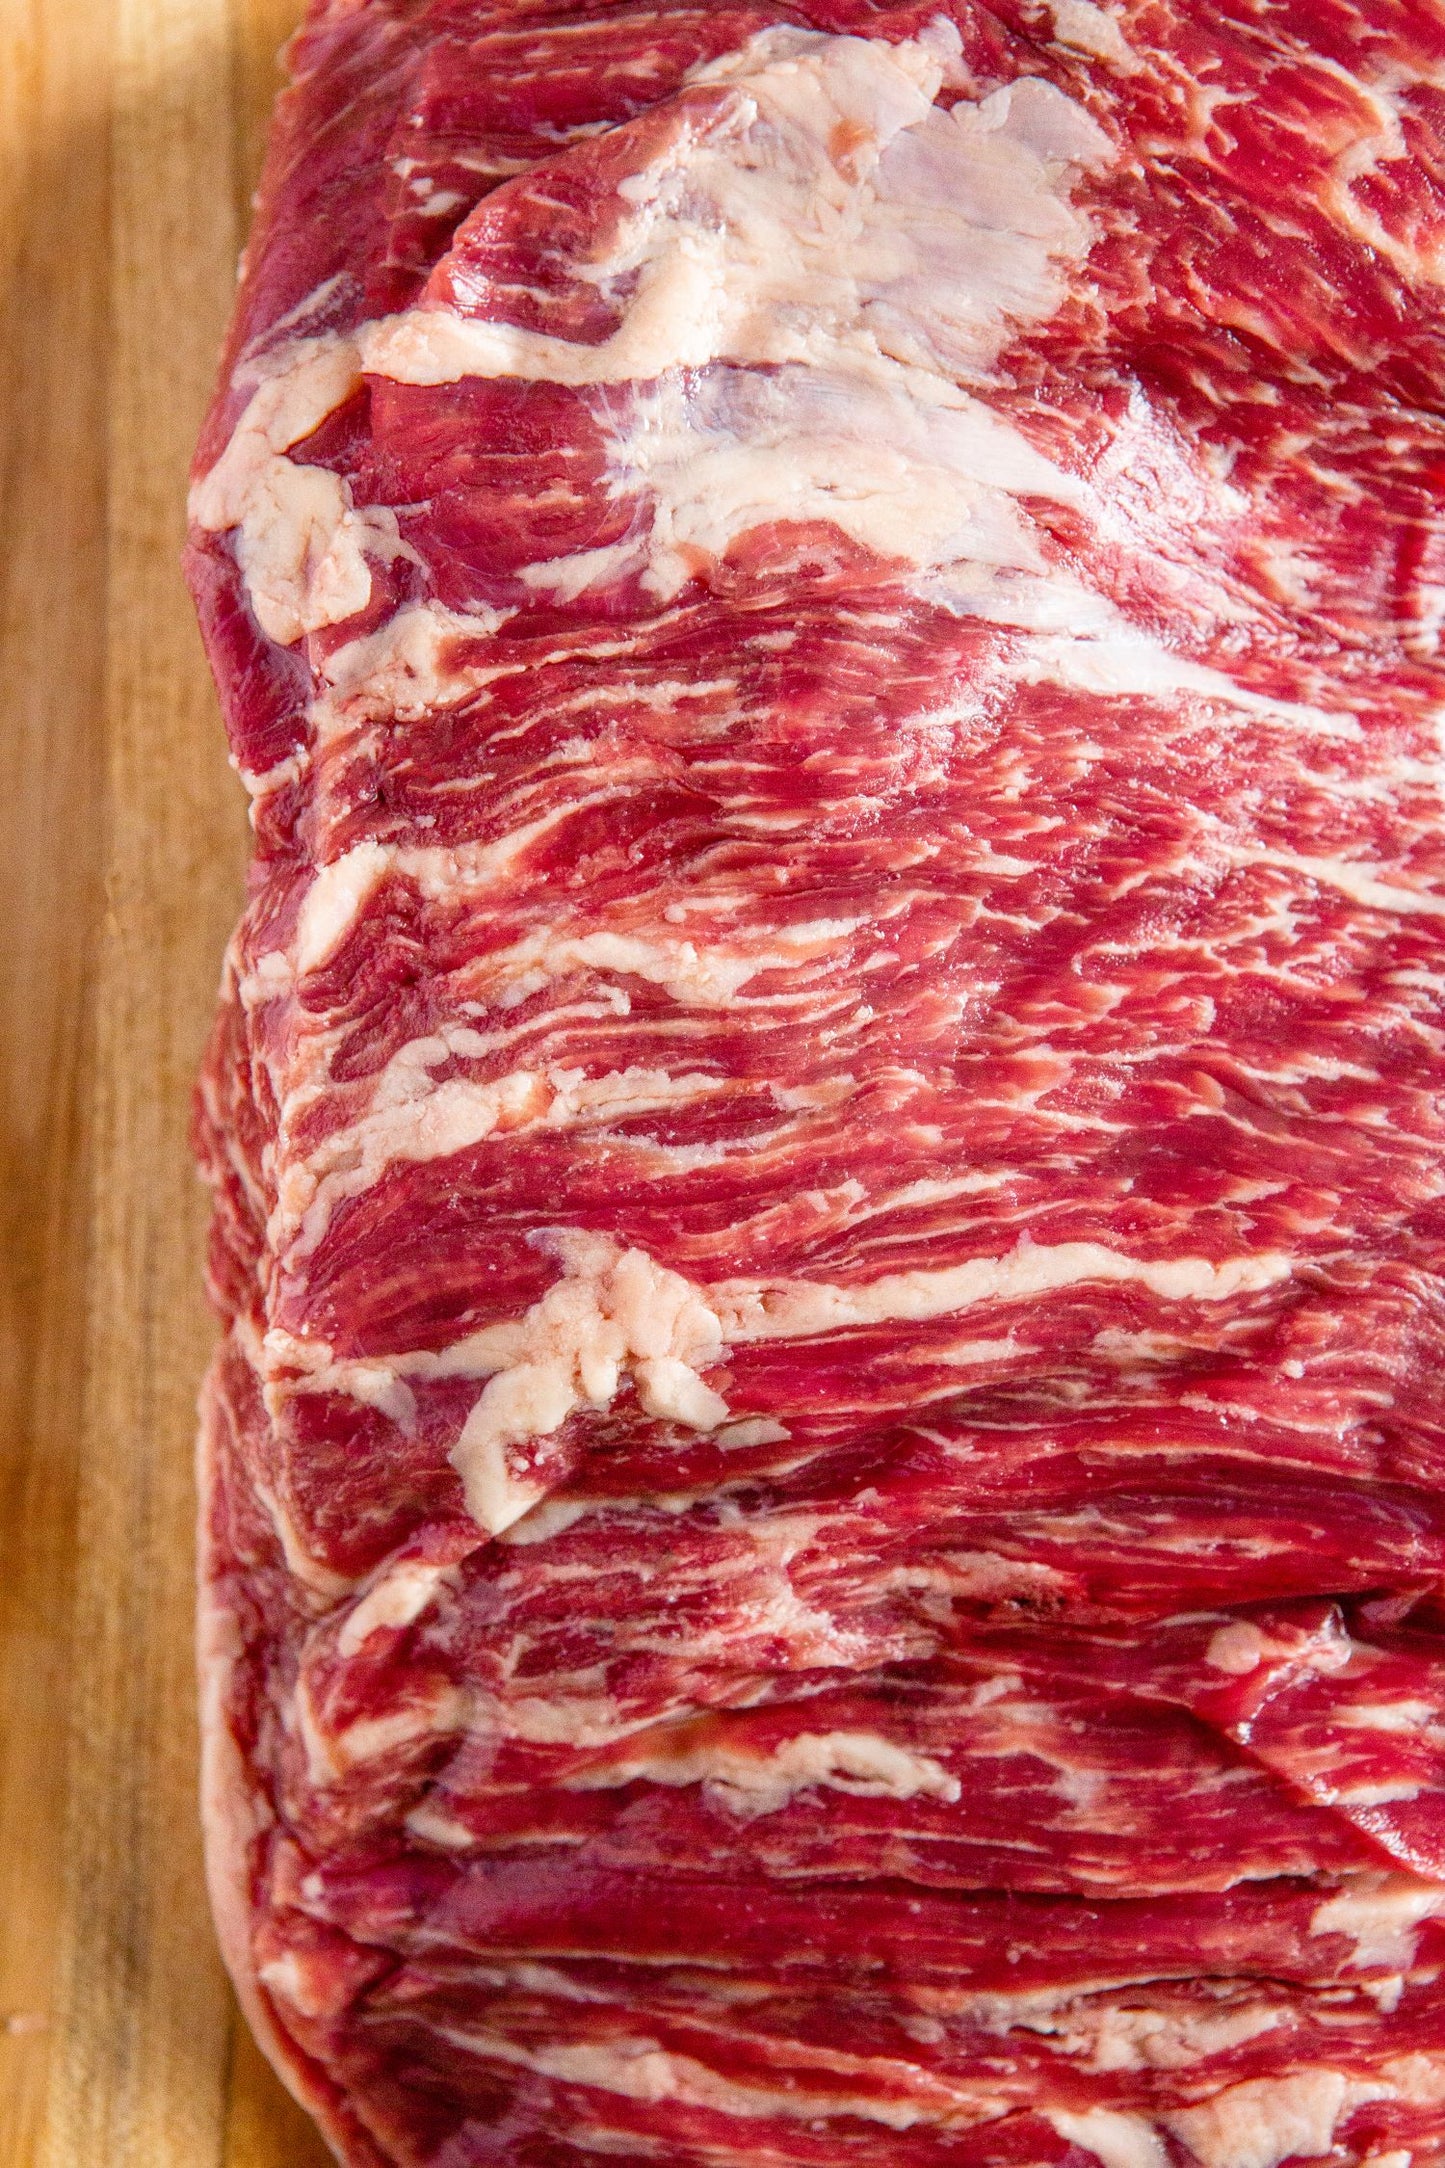 1/8 of an American Wagyu Beef Cow